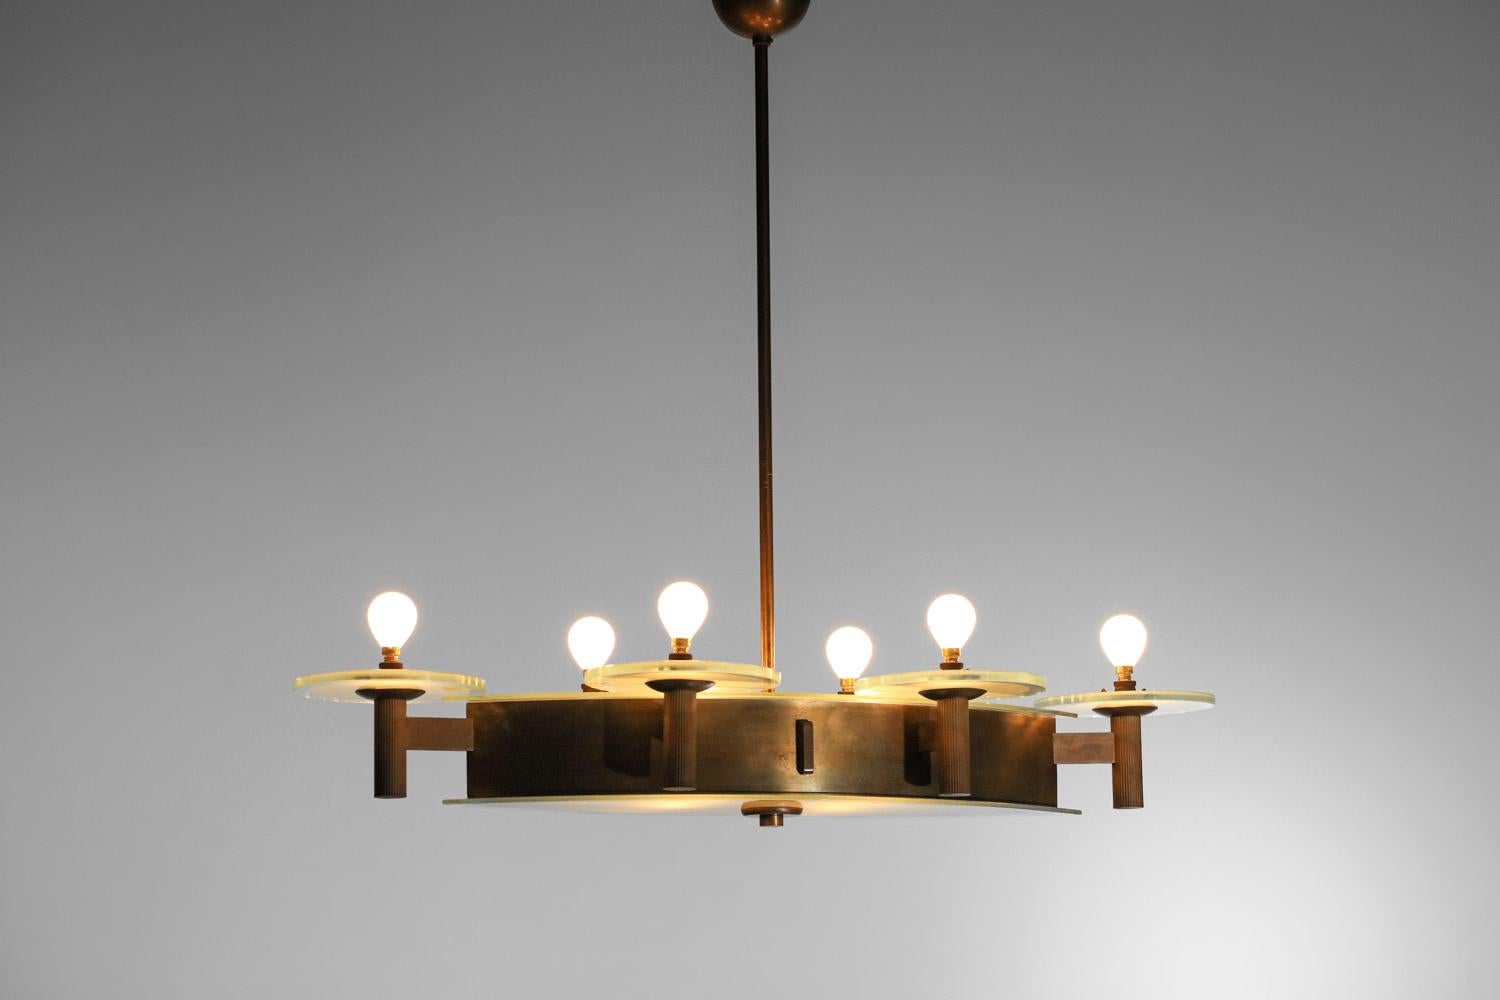 Italian art déco chandelier 50s in oval solid brass and glass Pietro chiesa For Sale 4